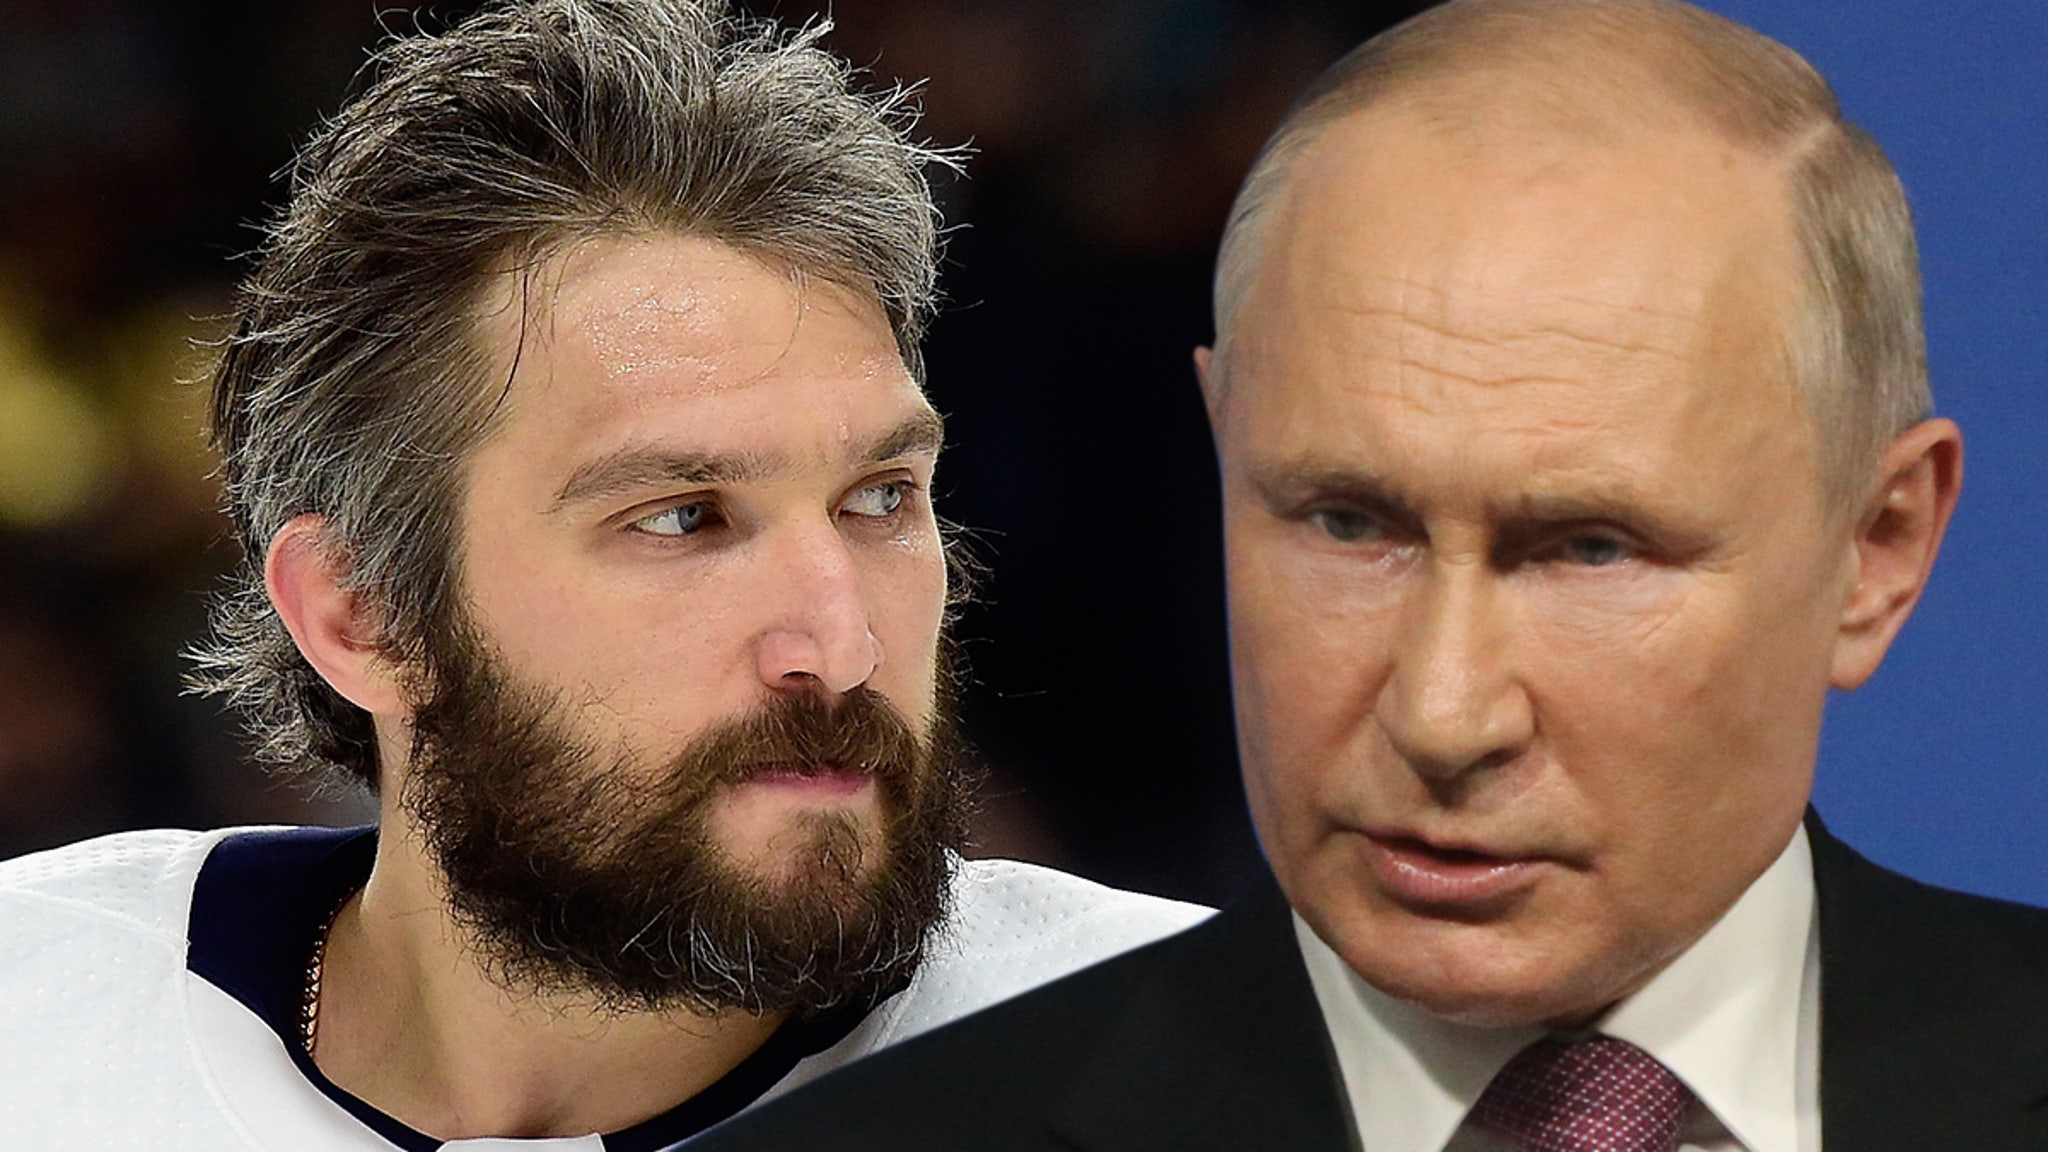 Russian athletes Alexander Ovechkin and Andrey Rublev call for 'no more  war' in first comments on crisis in Ukraine